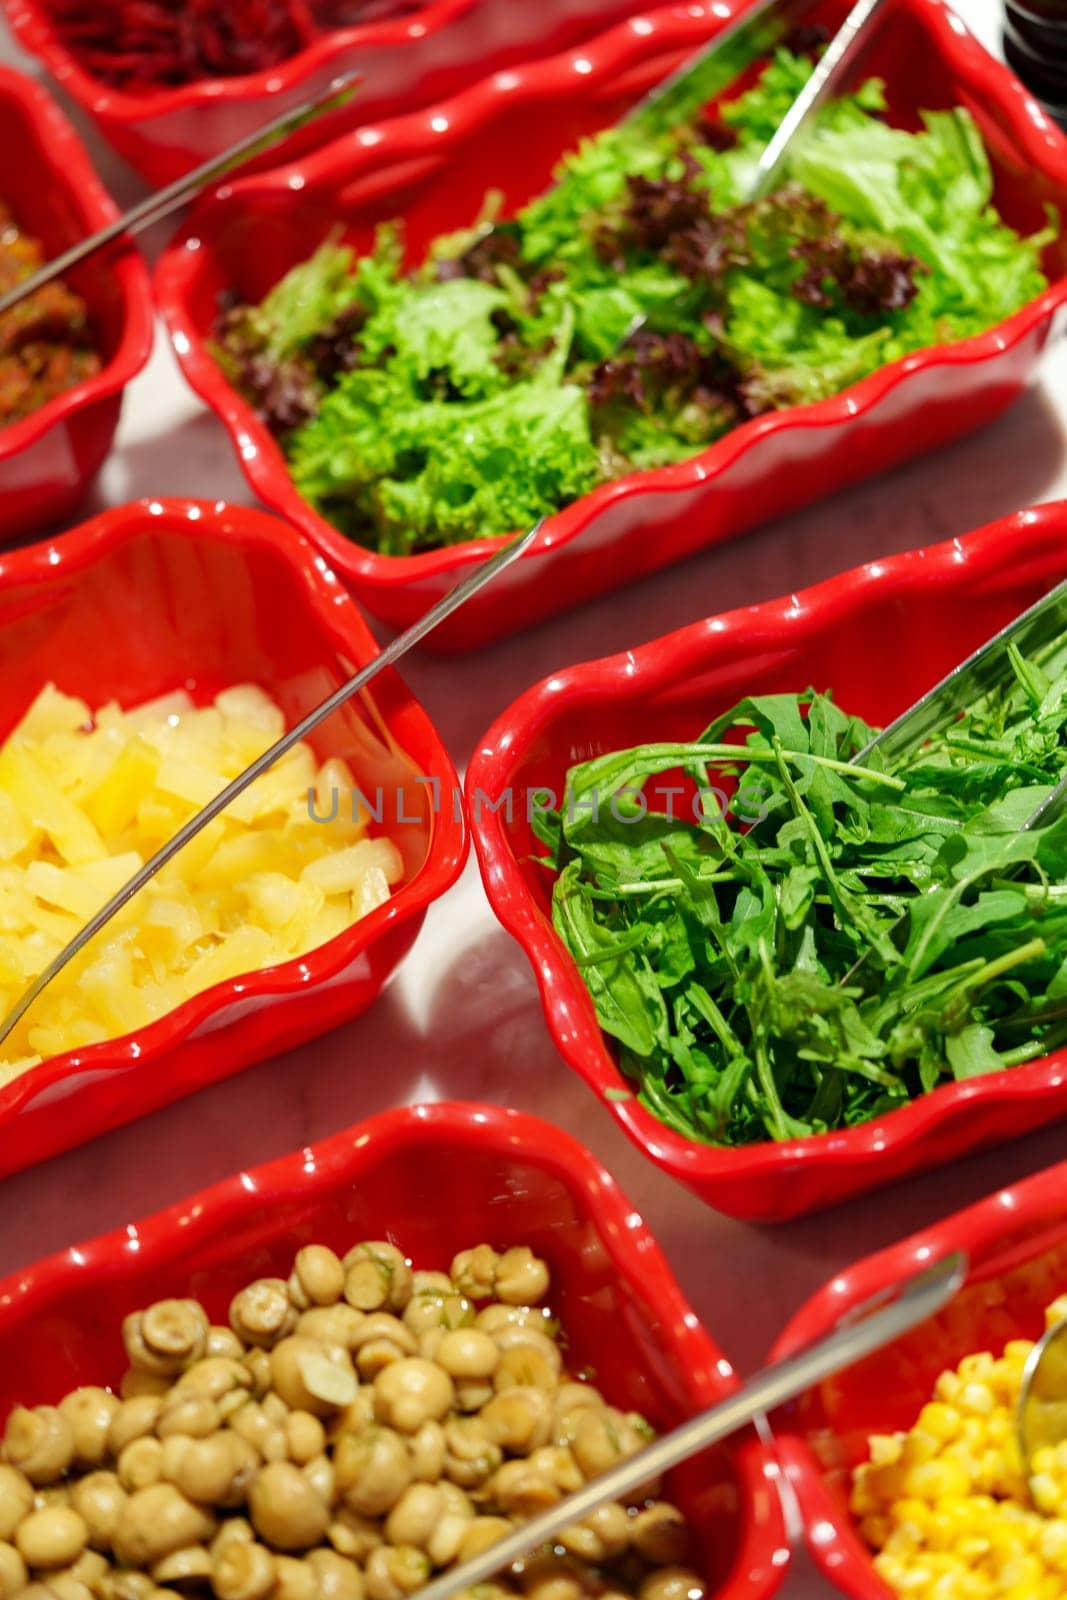 A variety of fresh salad ingredients are neatly presented in red dishes forming a vibrant buffet line. The bowls are filled with crisp greens, sweetcorn, and other tasty vegetables, inviting diners to create their own salad masterpiece. Each container is equipped with serving tongs or spoons for convenience, and condiments are provided along the table to enhance the flavors.